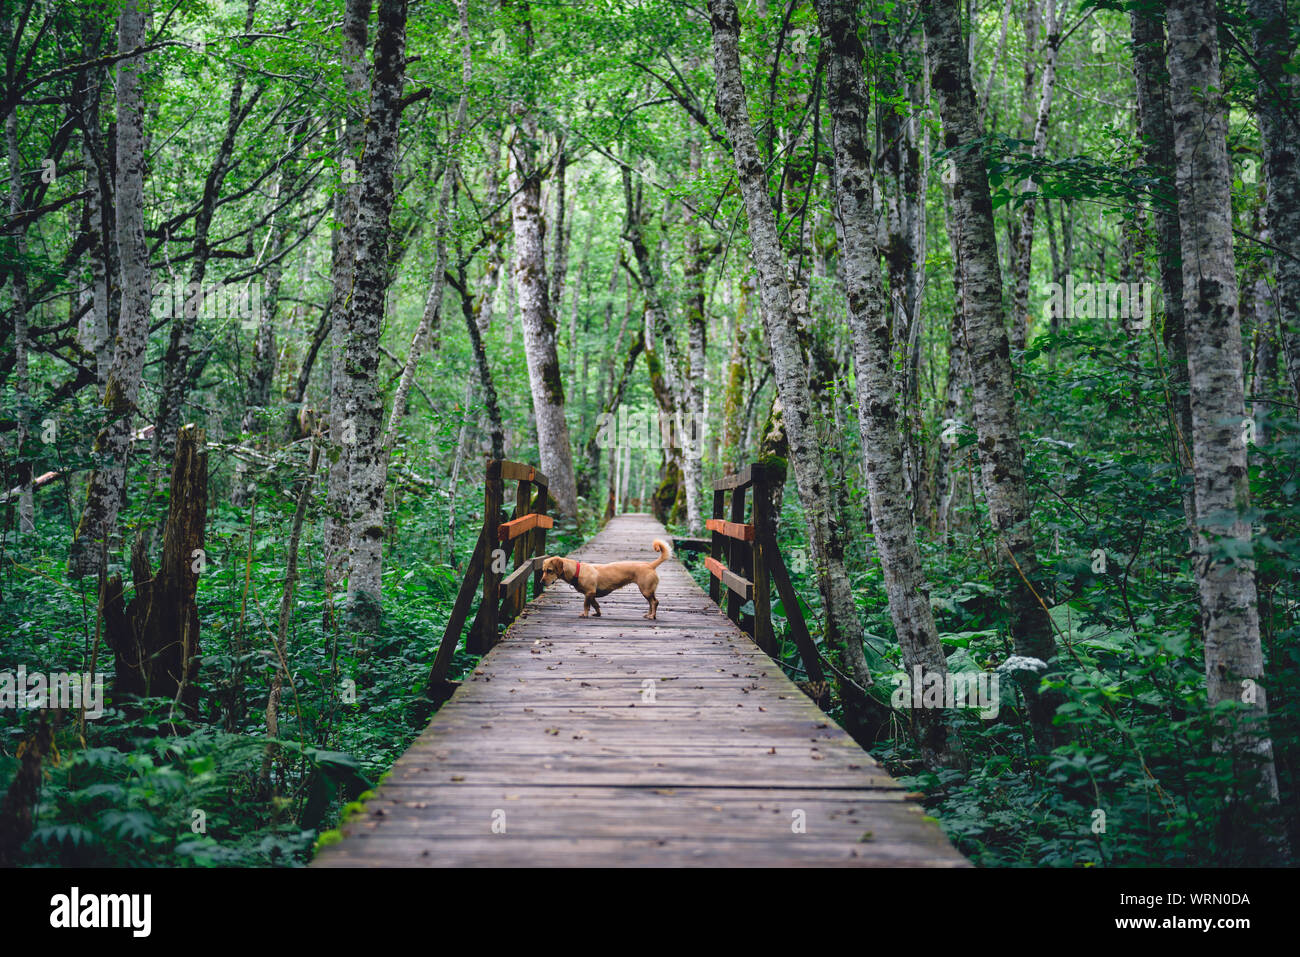 Small yellow dog standing on wooden forest trail Stock Photo